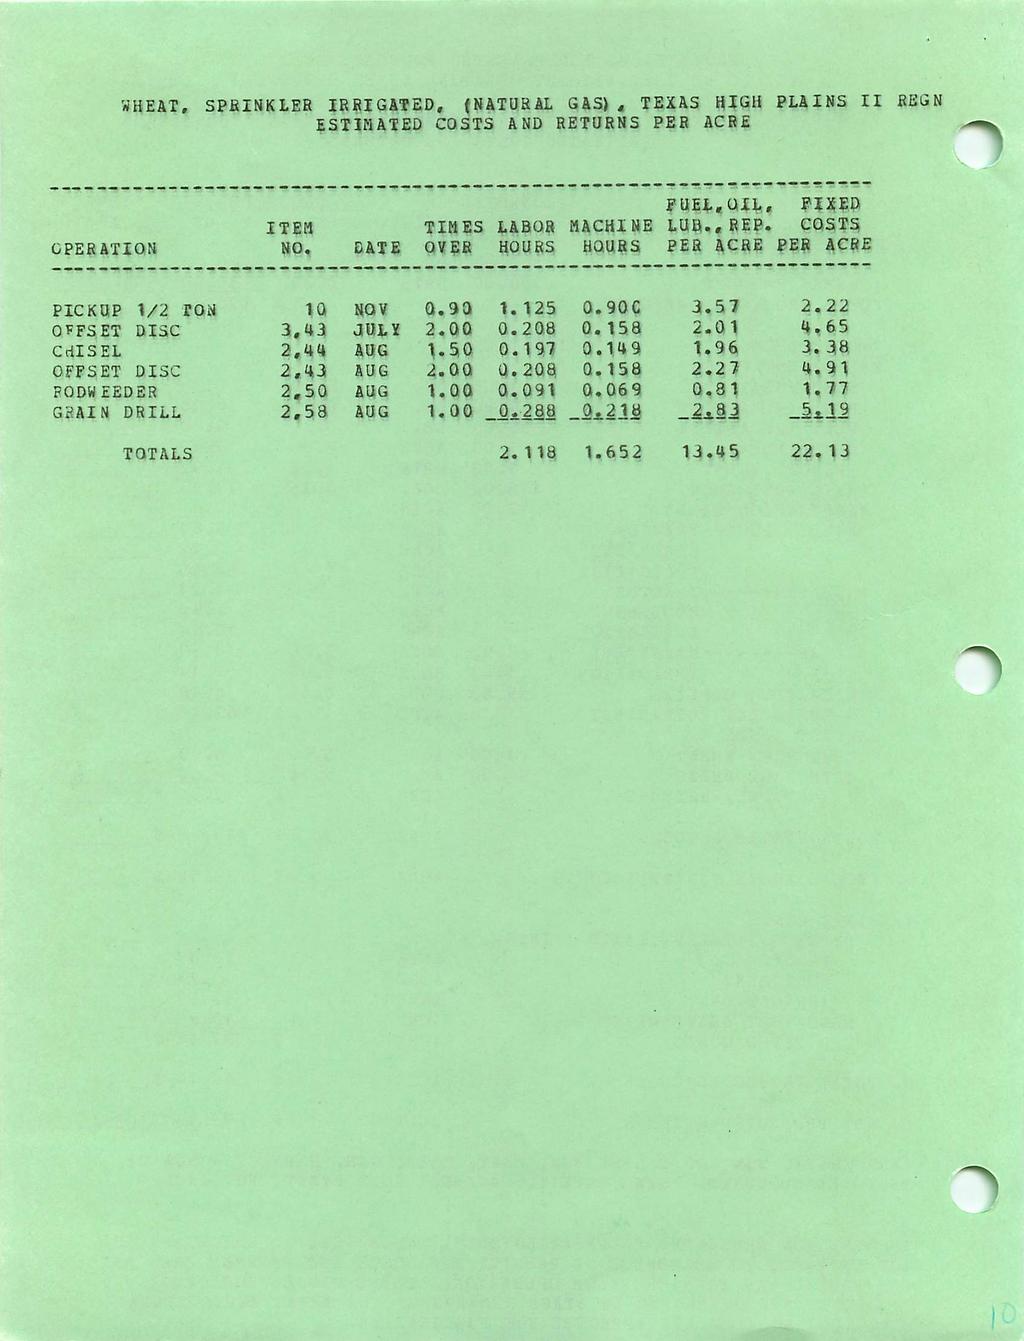 WHEAT, SPRINKLER IRRIGATED, (NATURAL GAS), TEXAS HIGH PLAINS II REGN ESTIMATED COSTS AND RETURNS PER - FUEL,OIL, FIXED ITEM TIMES LABOR MACHINE LUB,., REP. COSTS OPERATION NO.